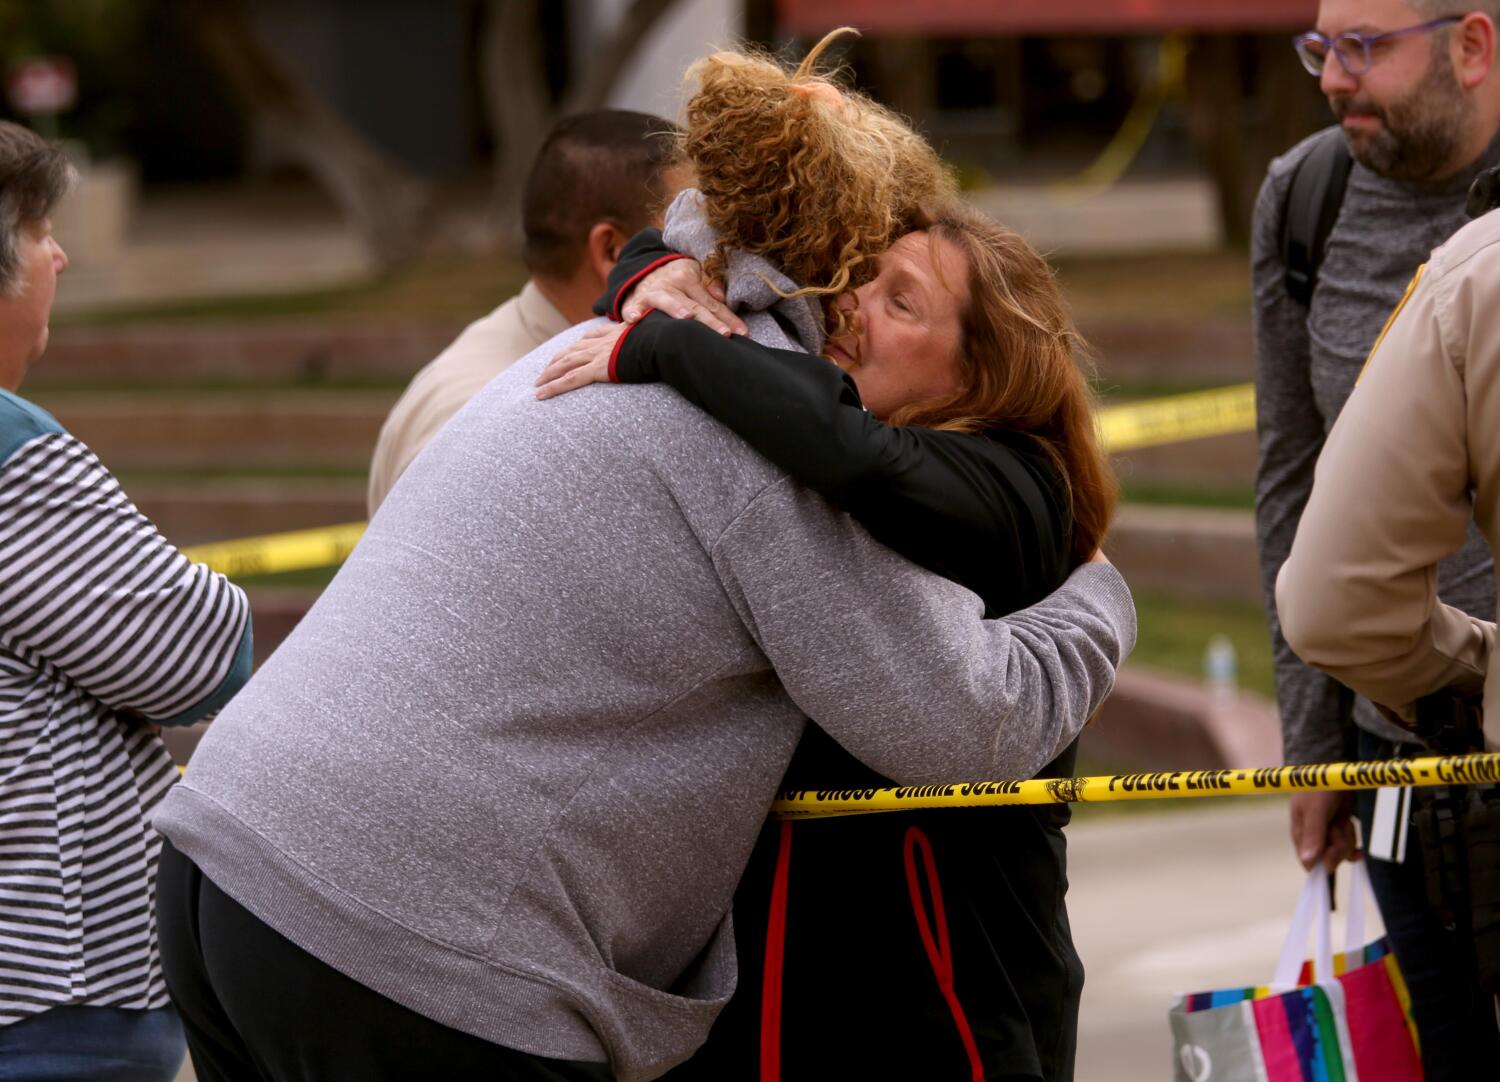 UNLV shooting upends semester, finals in question as students grapple with traumatic stress